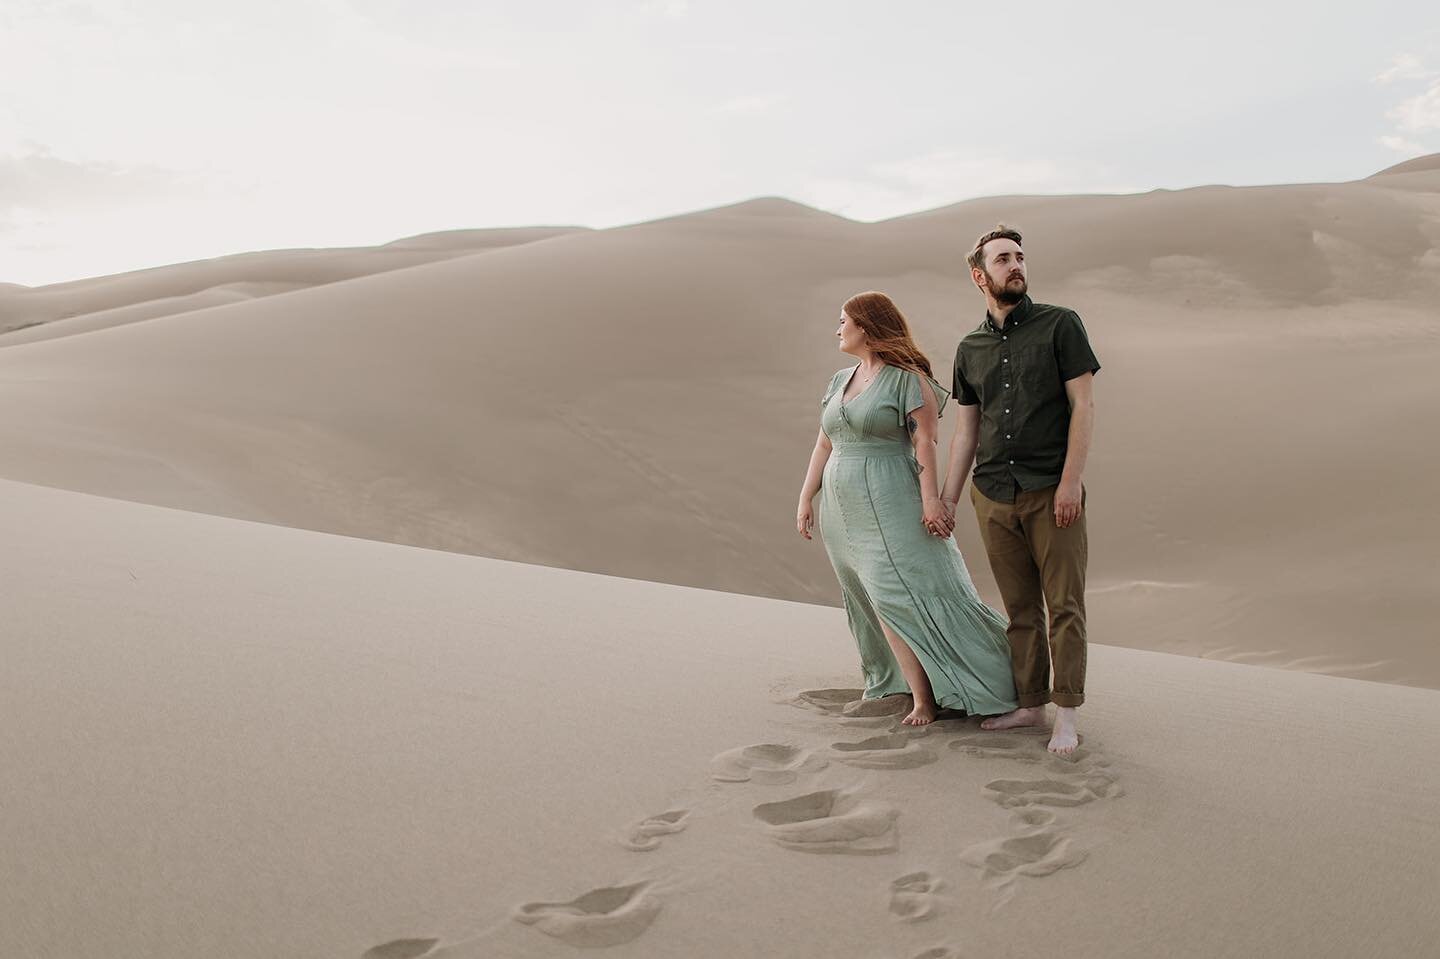 This is your sign to take off your shoes and find some sand to walk on 🌵

.

#coloradoweddingphotographer #coloradoelopementphotographer #dunes #sand #couplephotography #rockymountainbride #candidweddingphotography #filmweddingphotographer #colorado